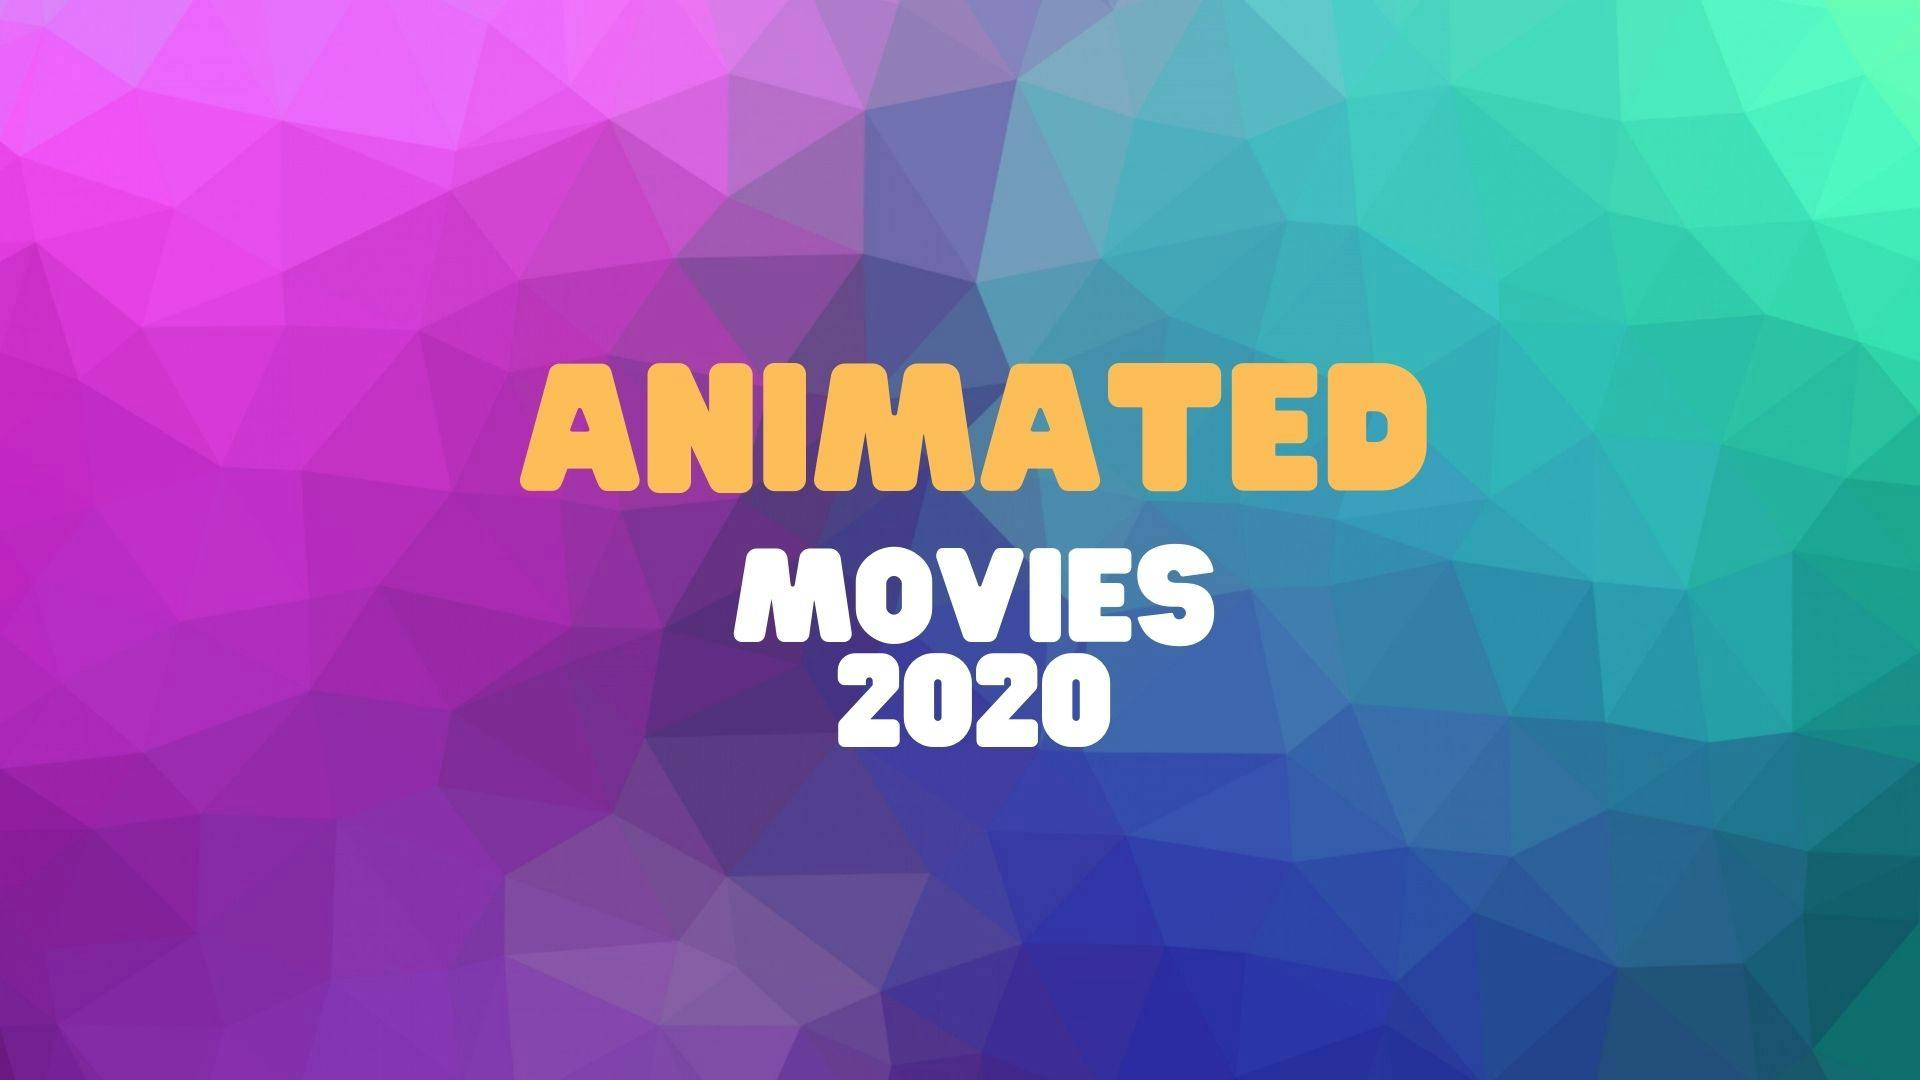 Best 5 Animated movies of 2020